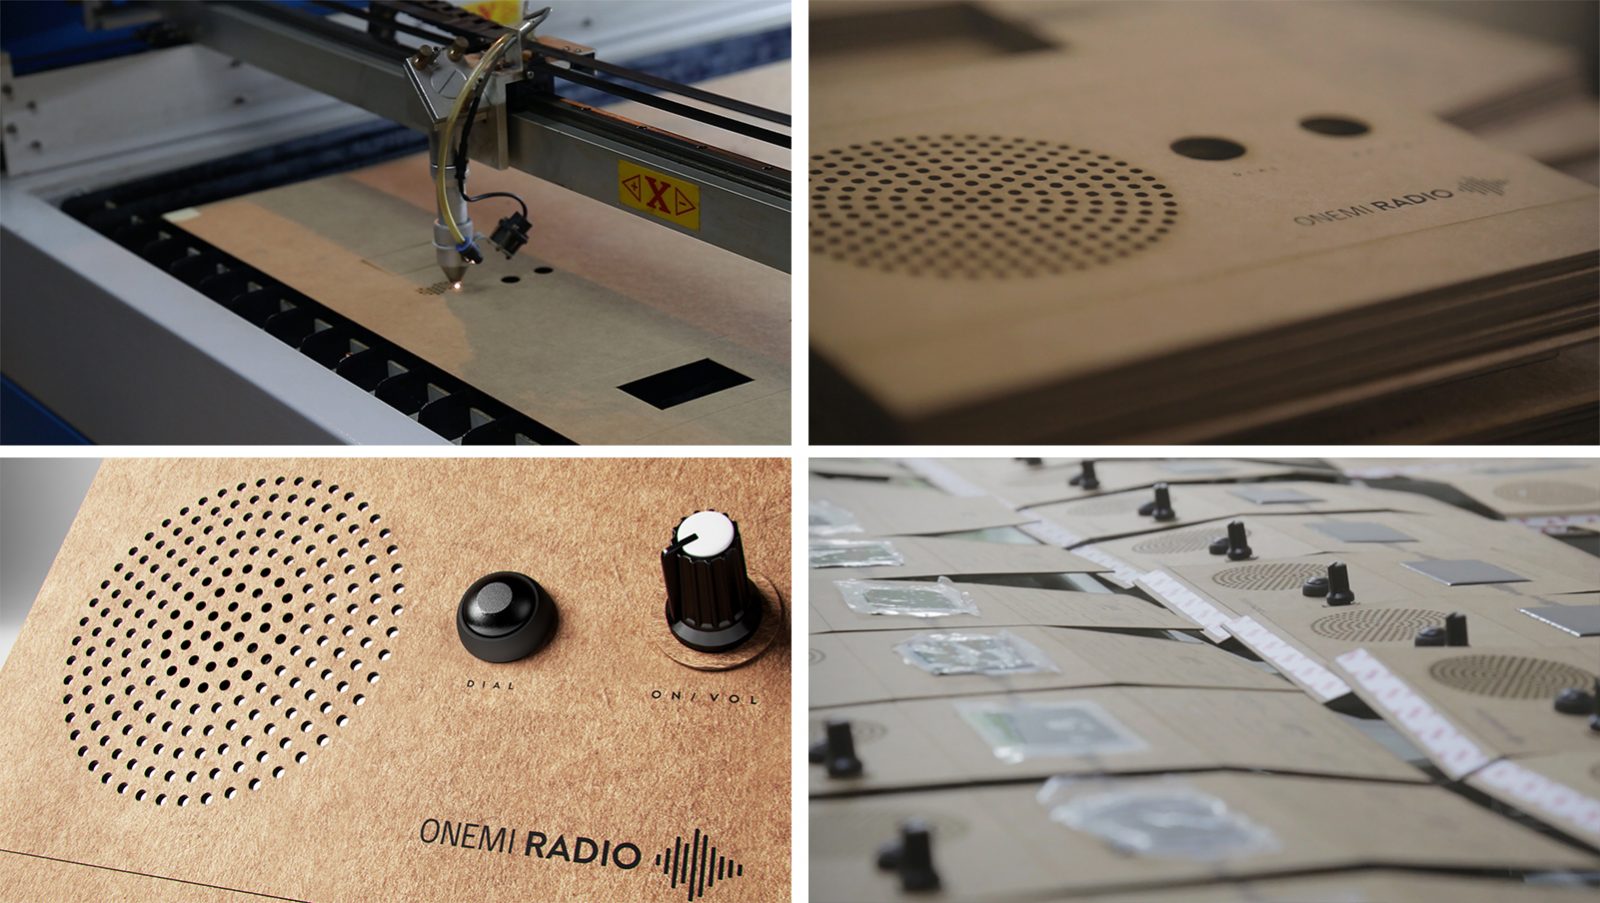 ONEMI Radio - An emergency radio receiver with photovoltaic cells